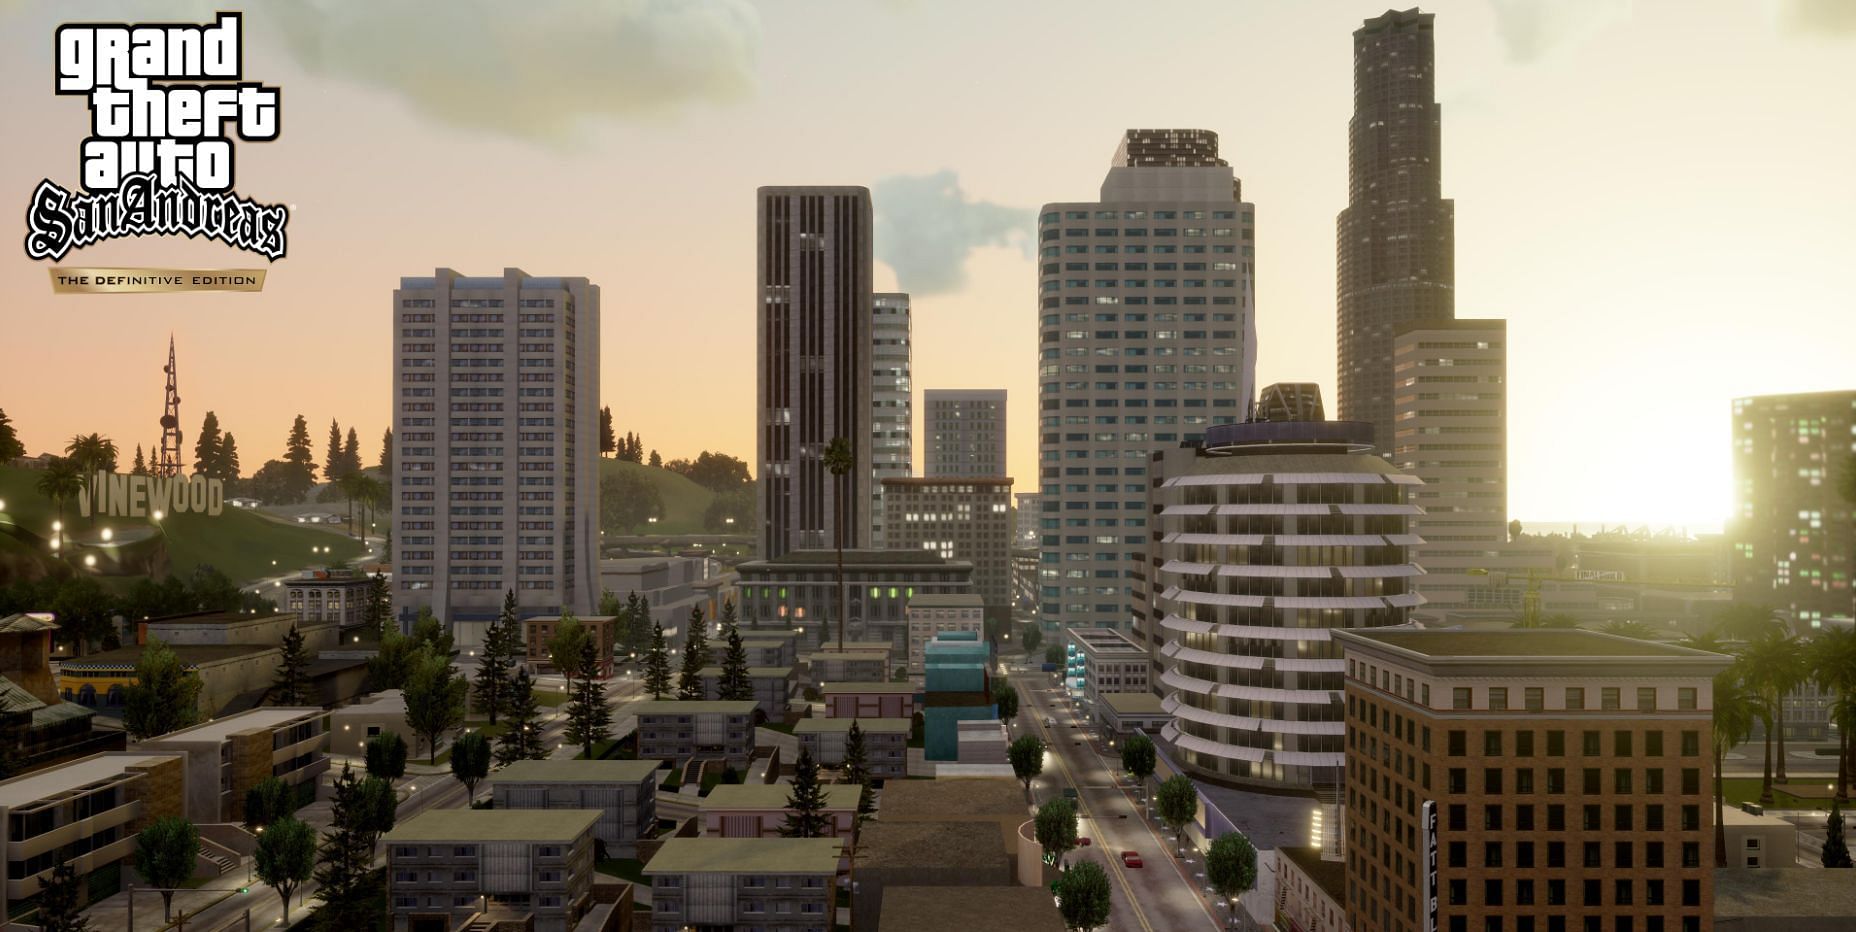 The GTA Trilogy improves several aspects about the original games, including their graphics (Image via Rockstar Games)